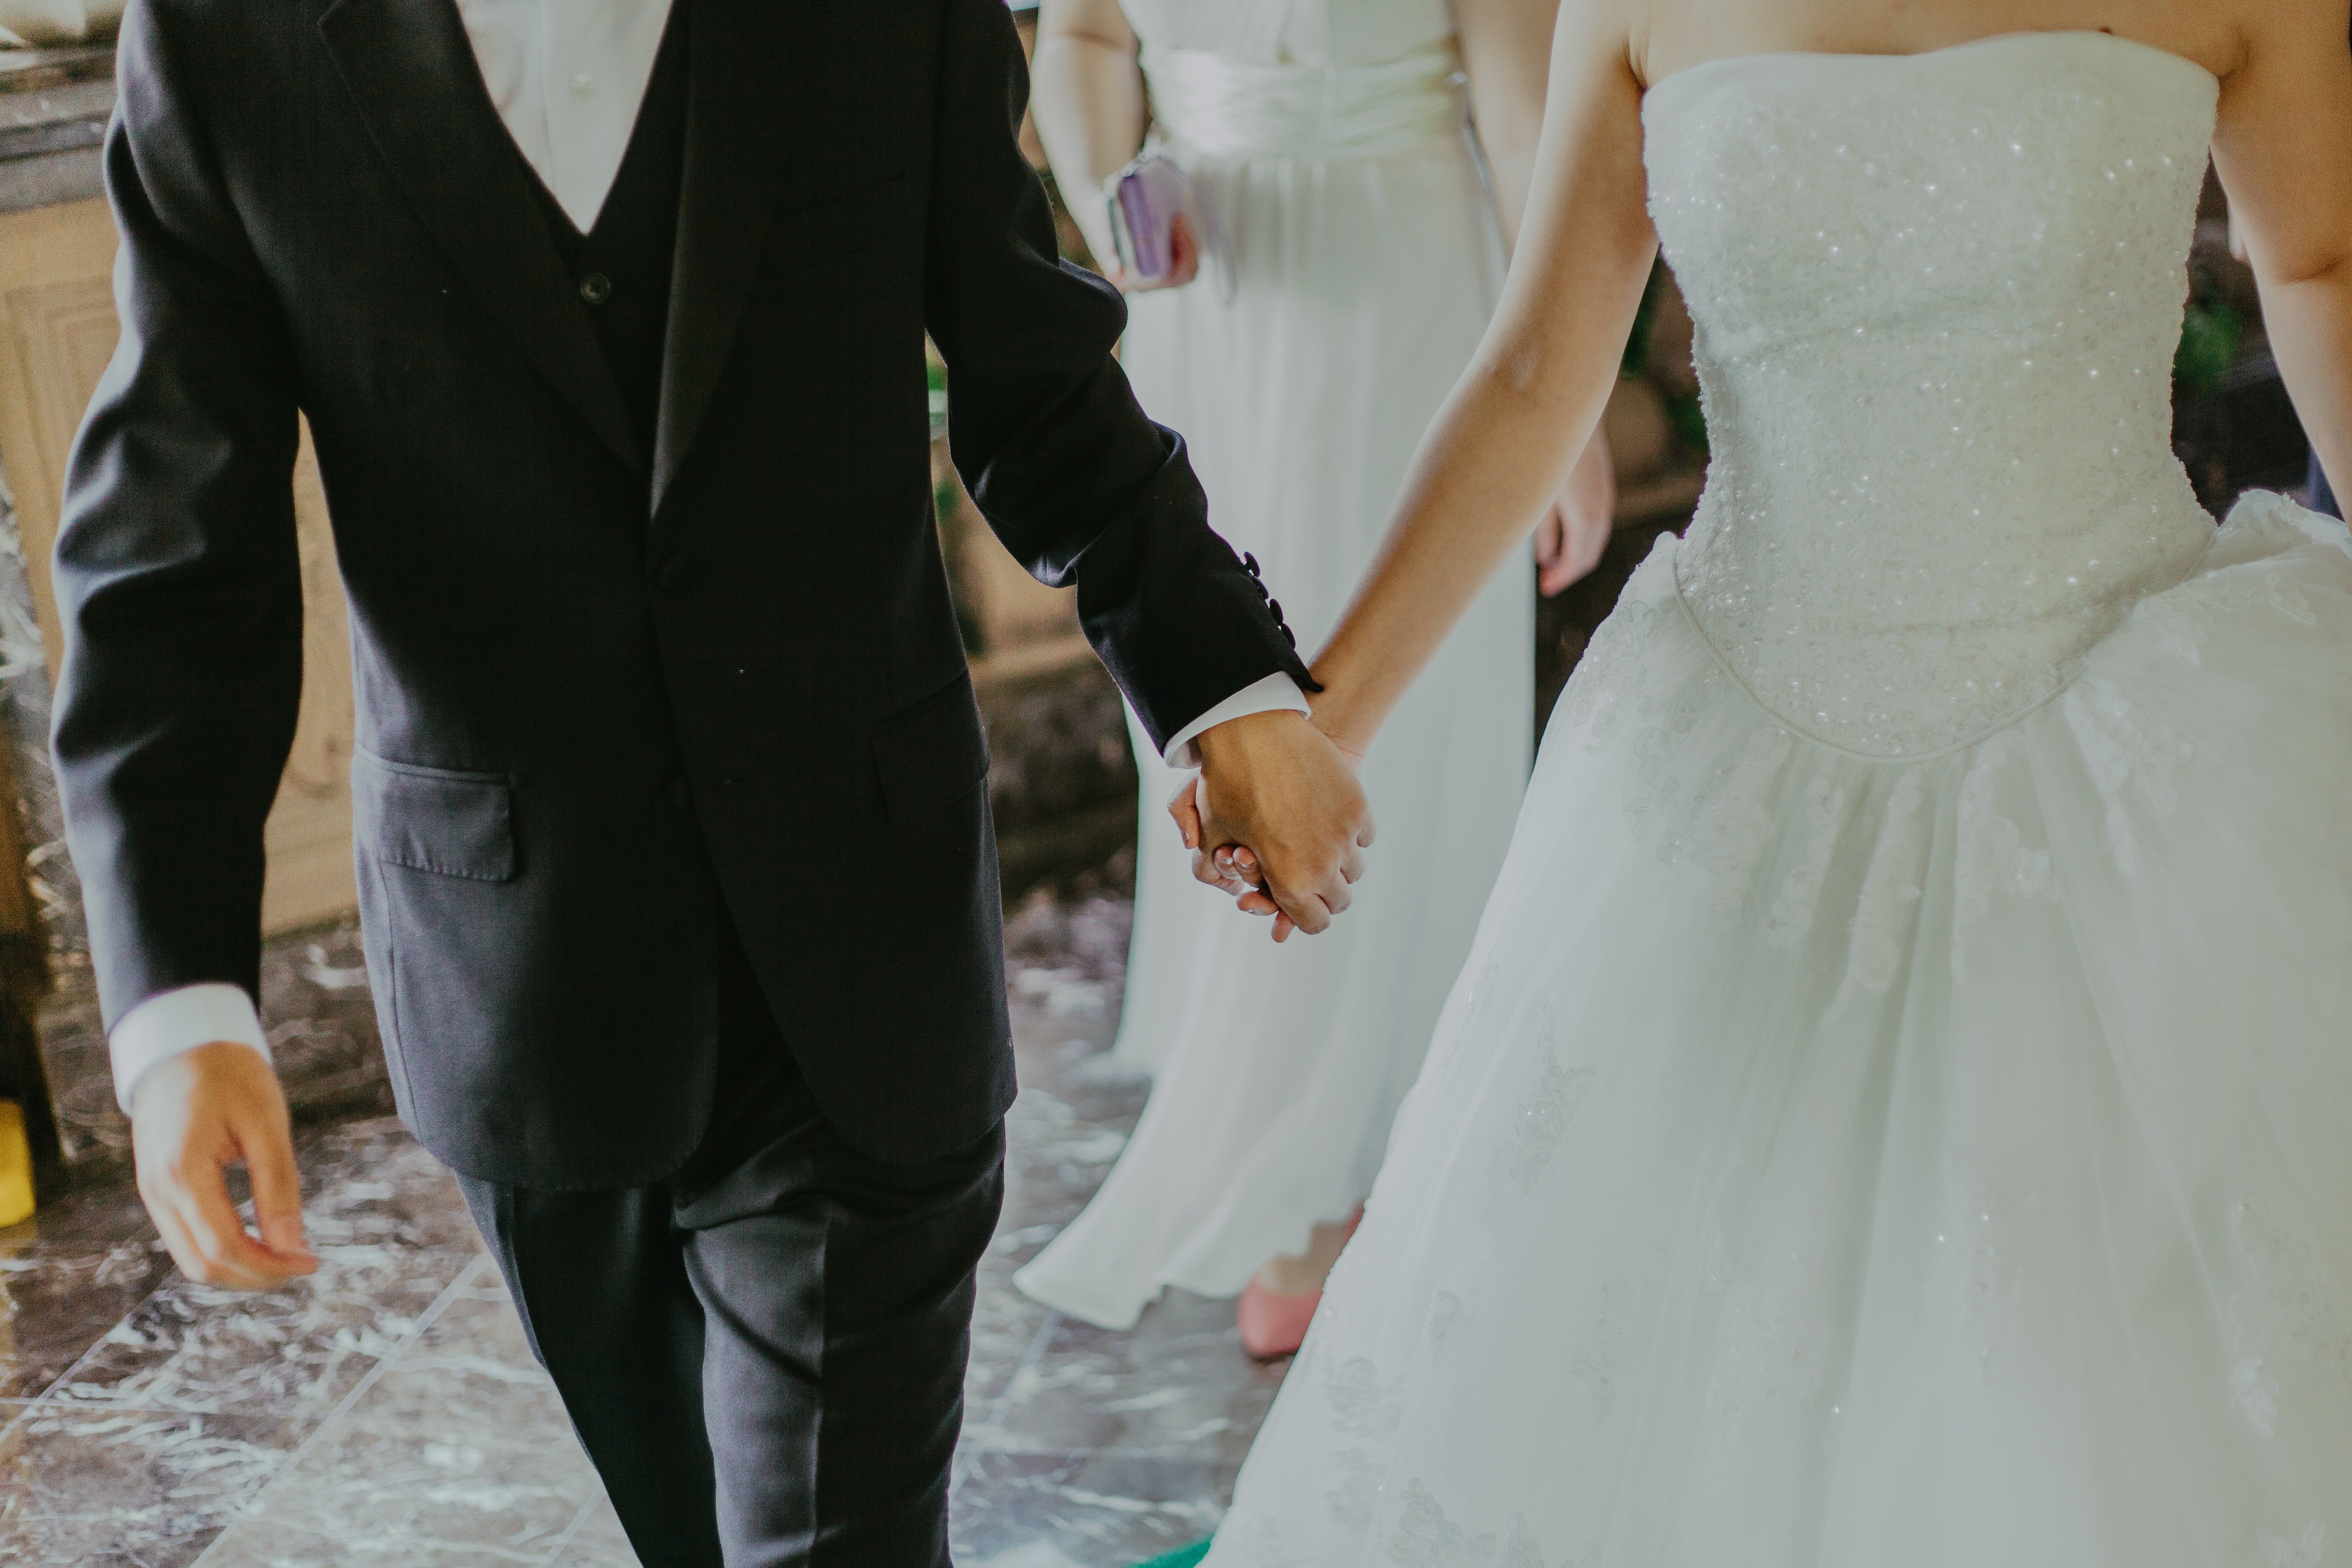 Madison couldn't imagine getting married without her dad by her side. | Source: Pexels